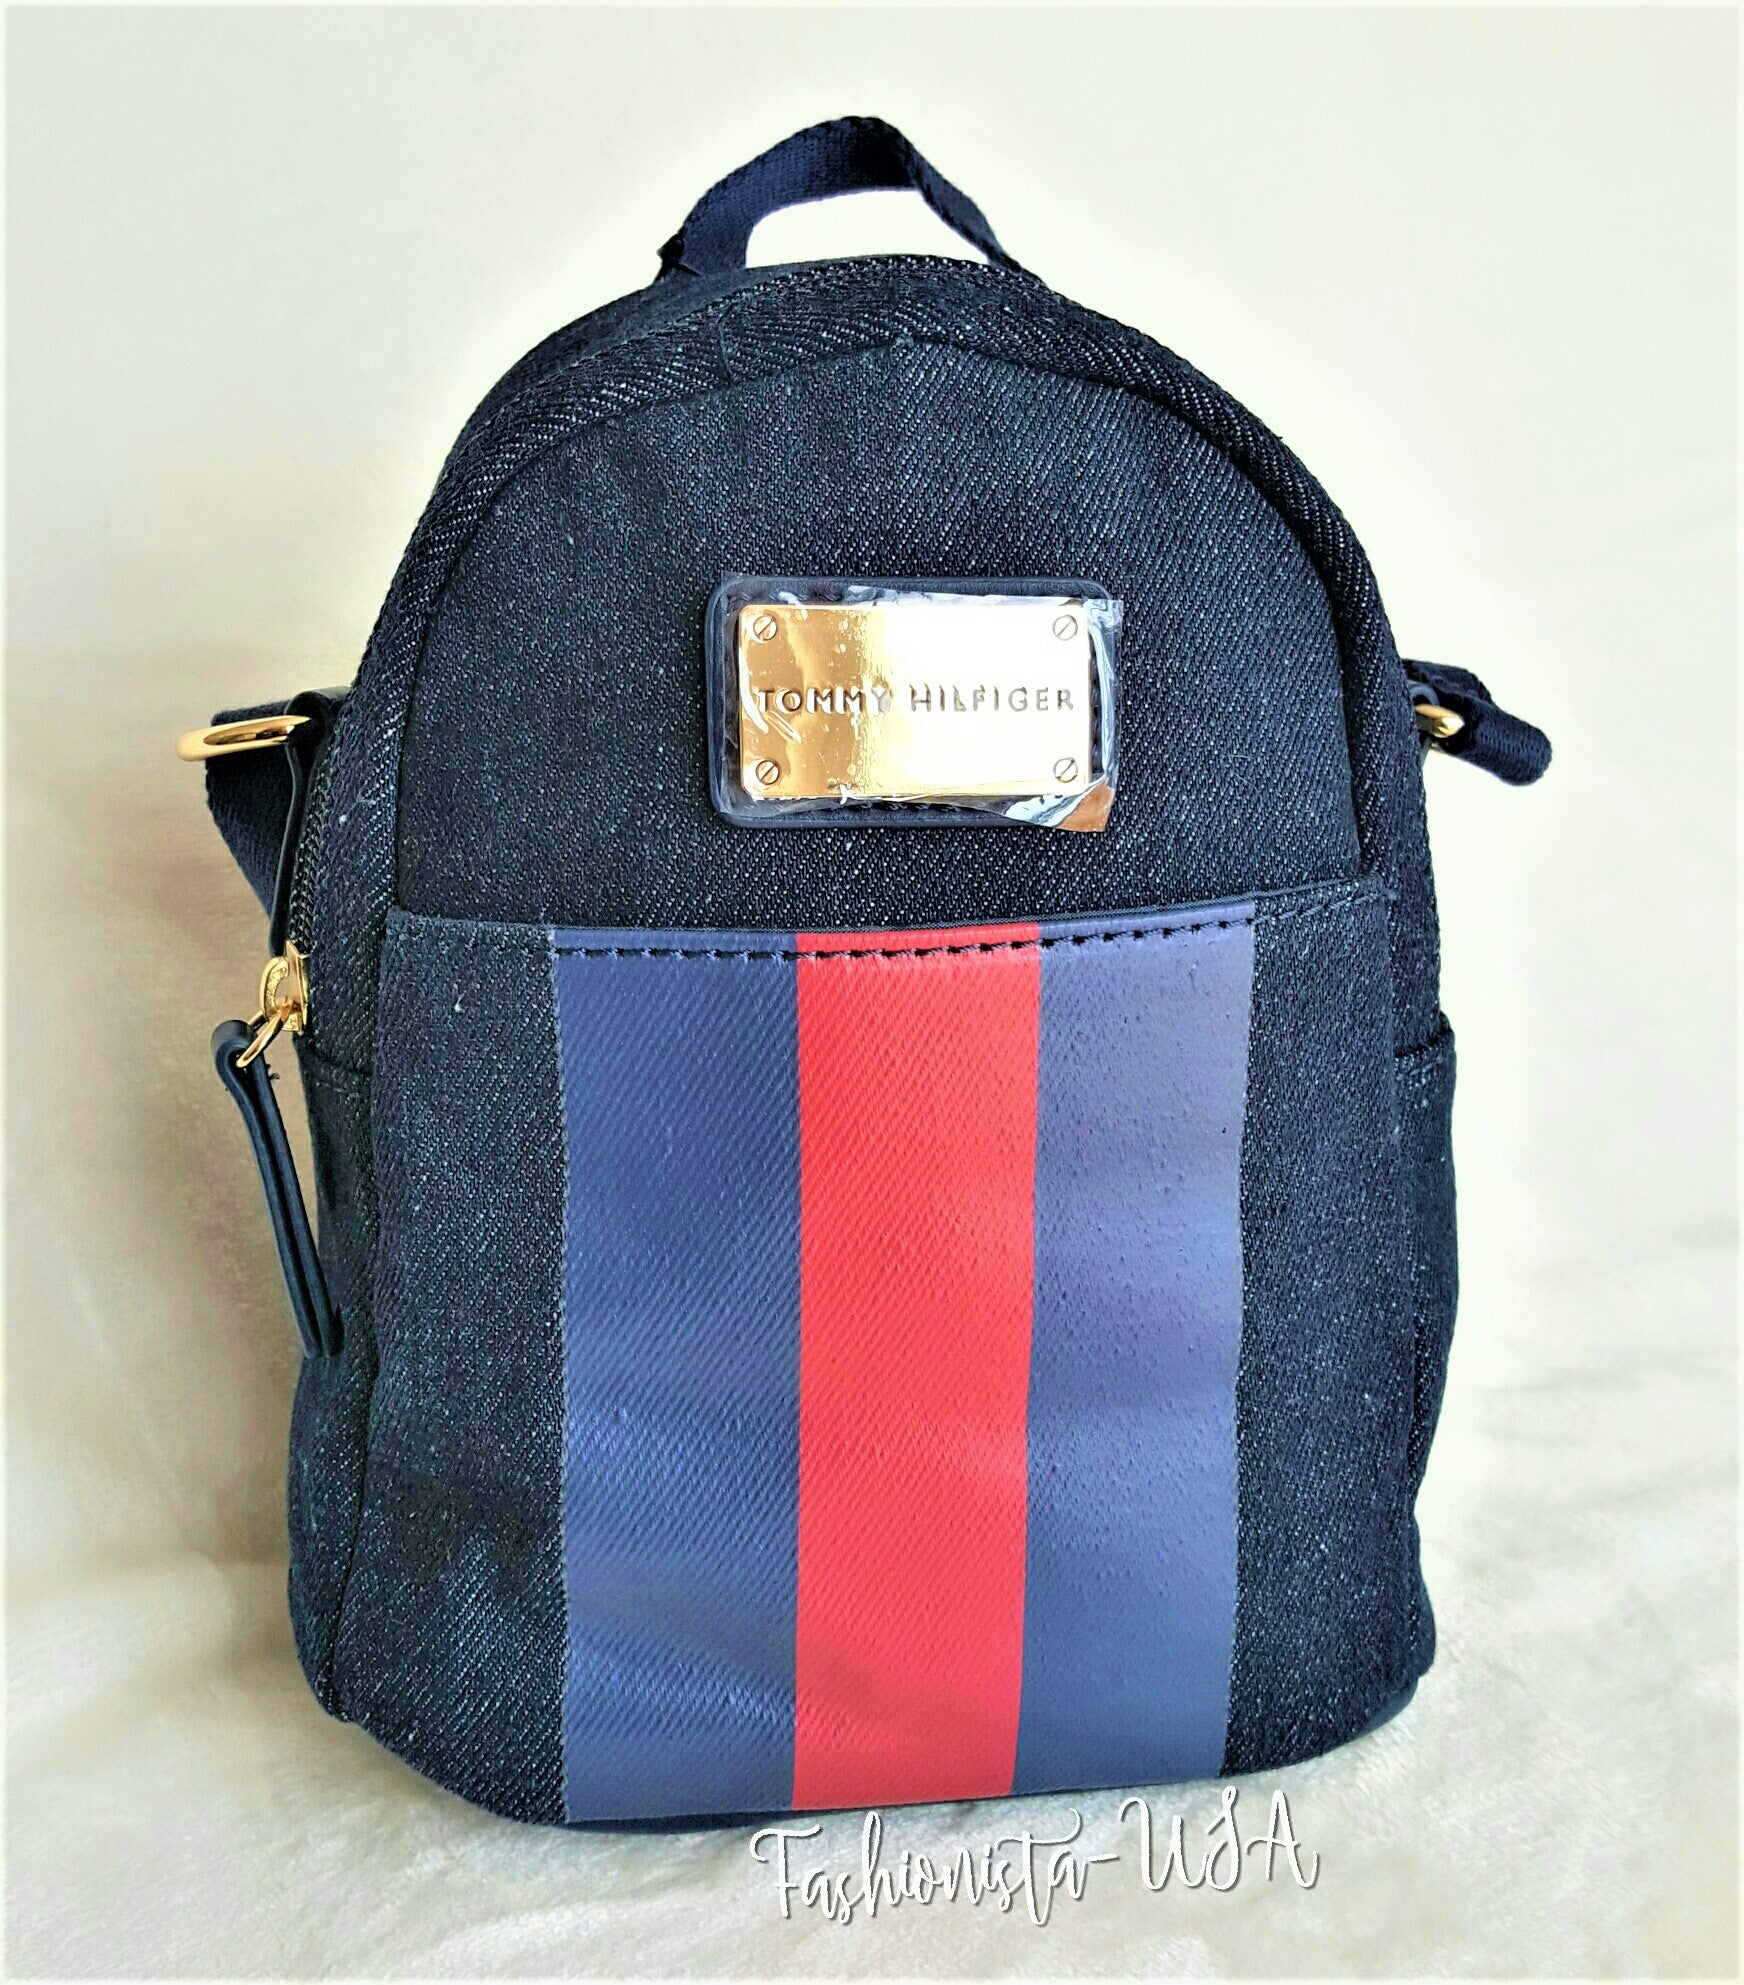 TOMMY HILFIGER NAVY Backpack style MINI X-body Bag -Retail – Flair USA